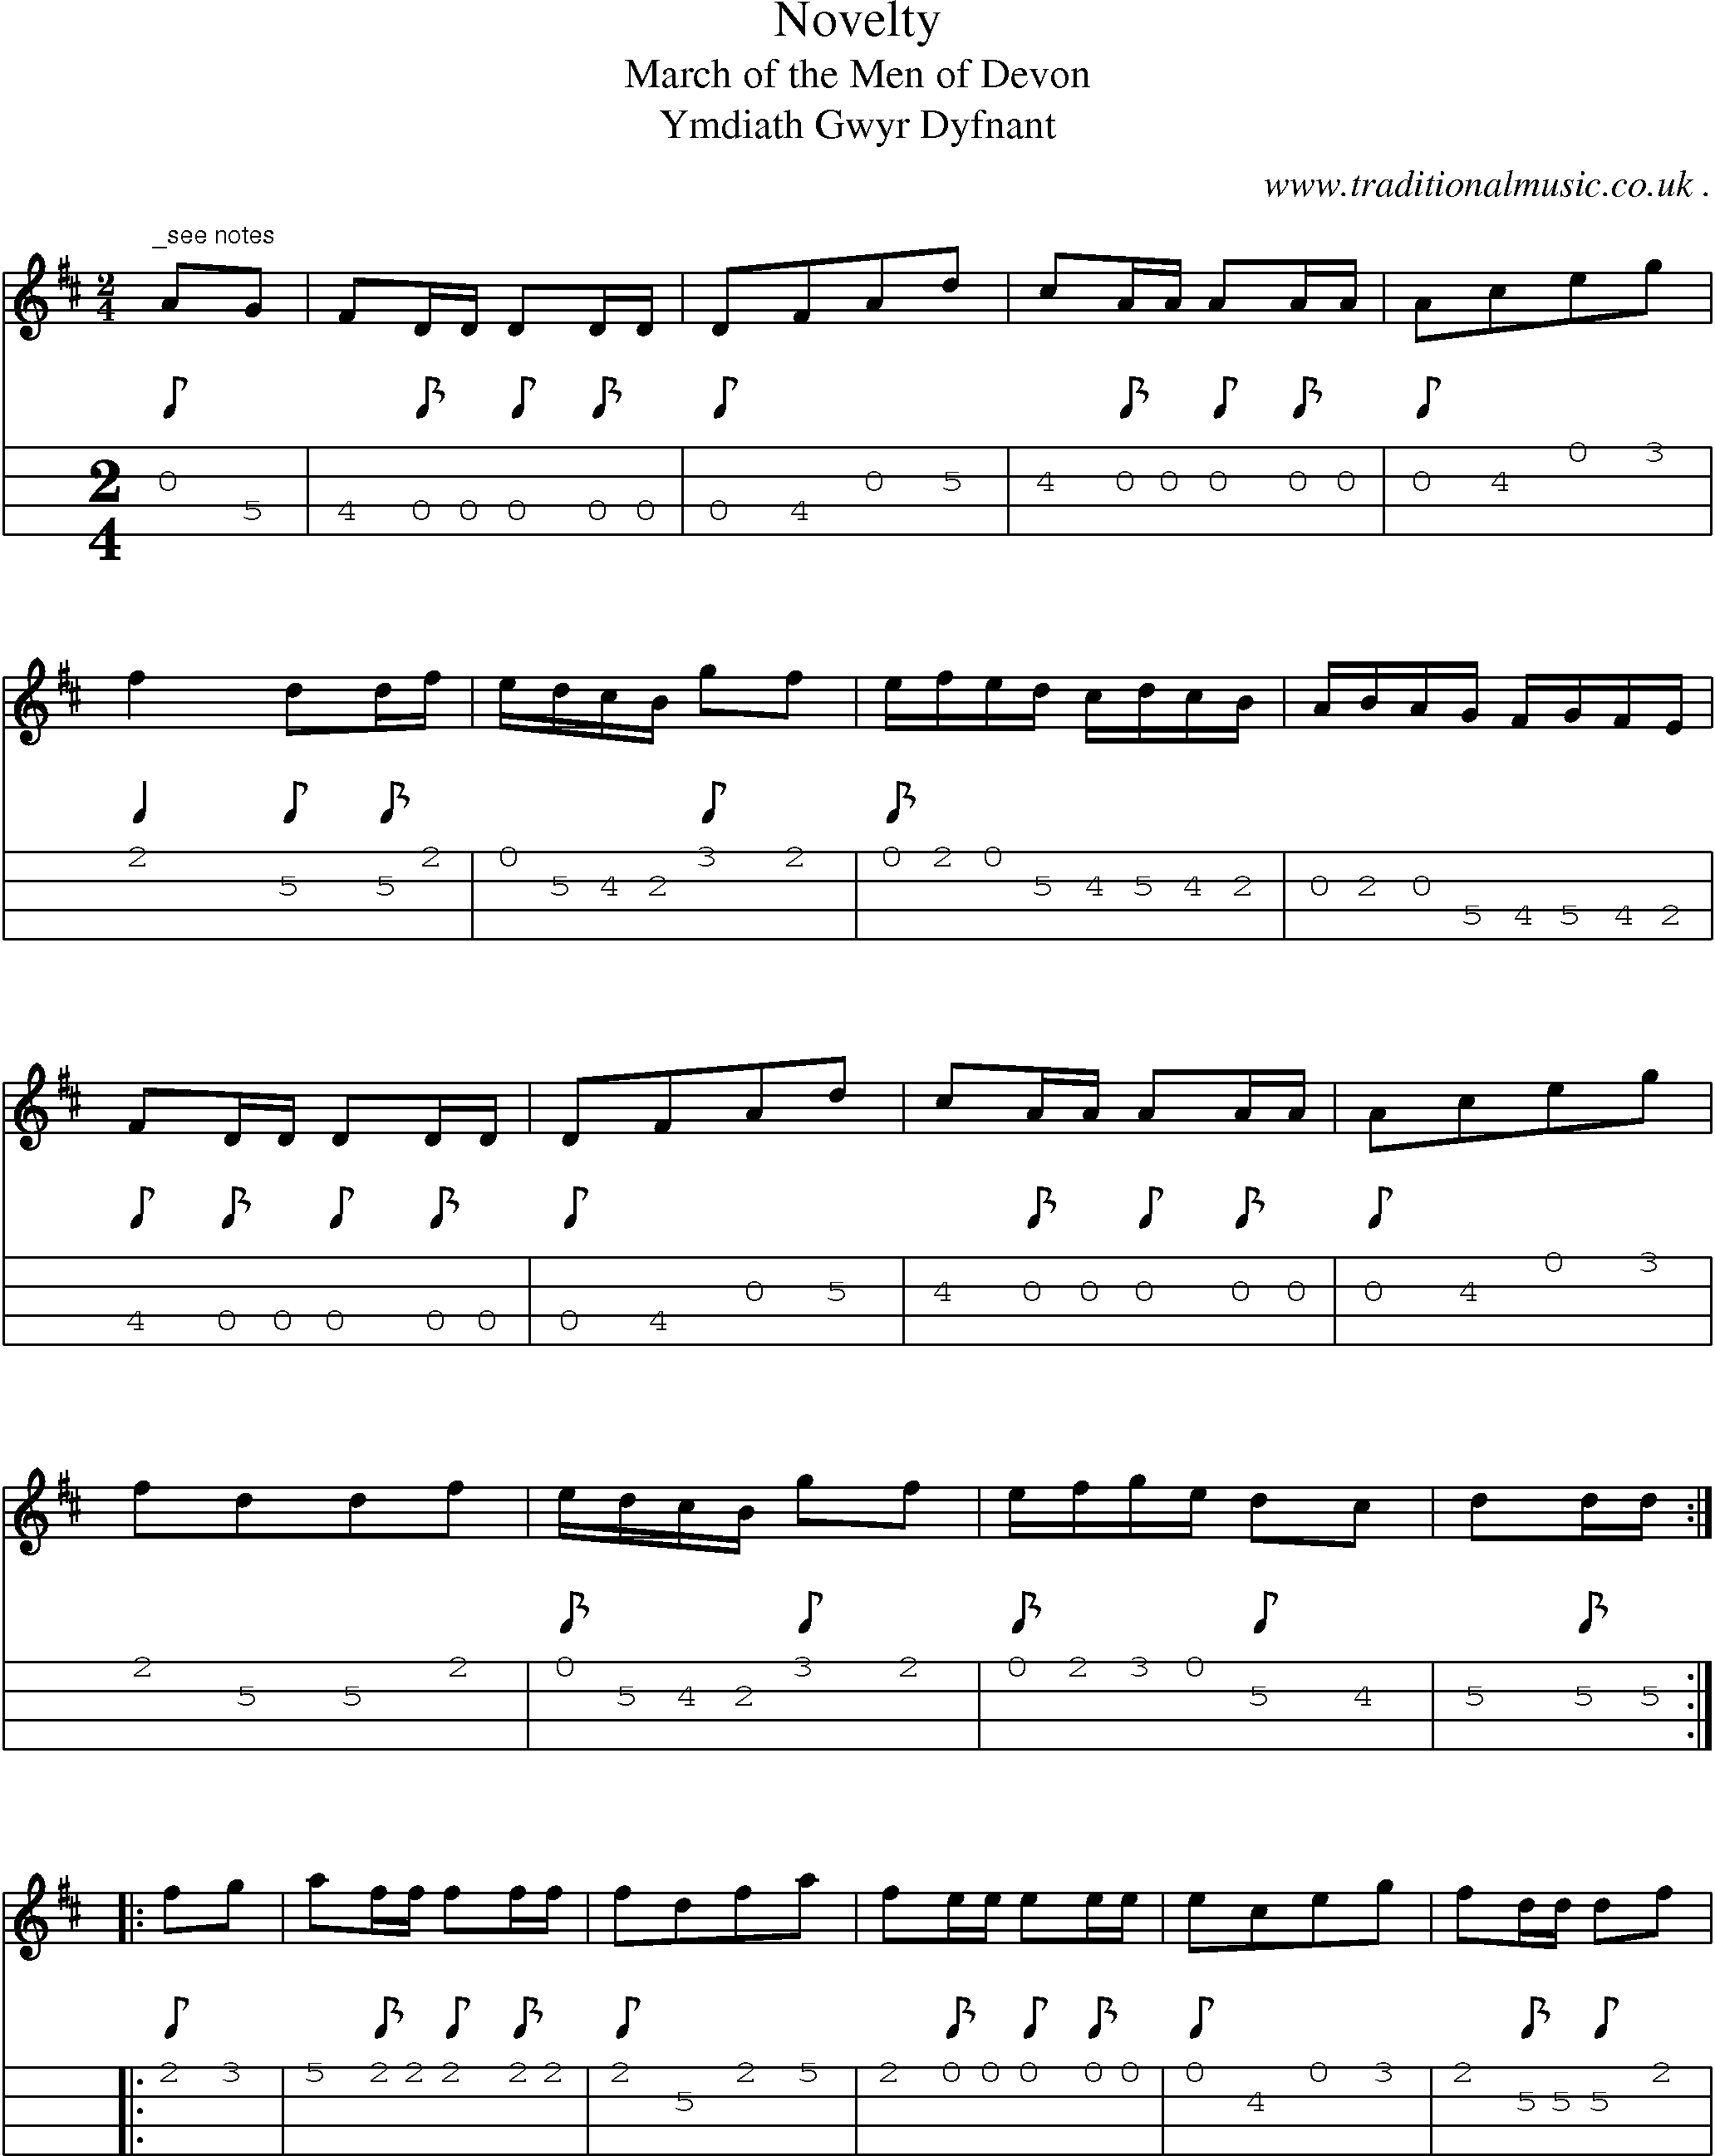 Sheet-Music and Mandolin Tabs for Novelty